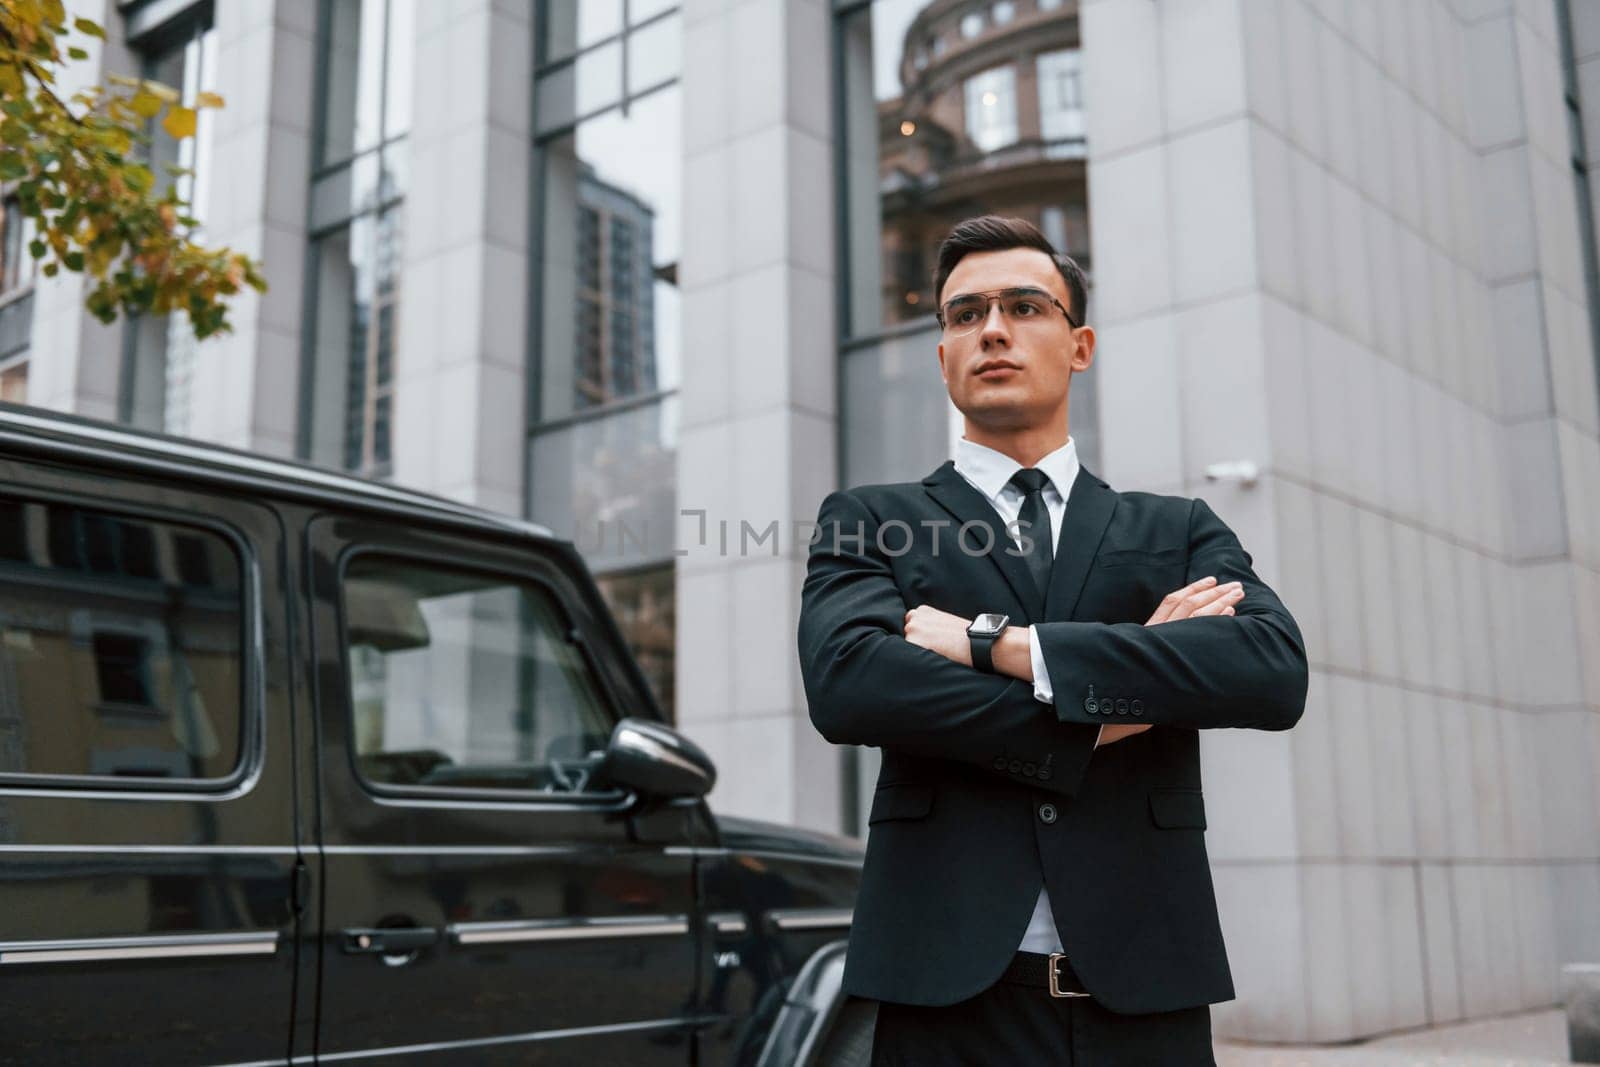 Standing with arms crossed. Businessman in black suit and tie is outdoors in the city.